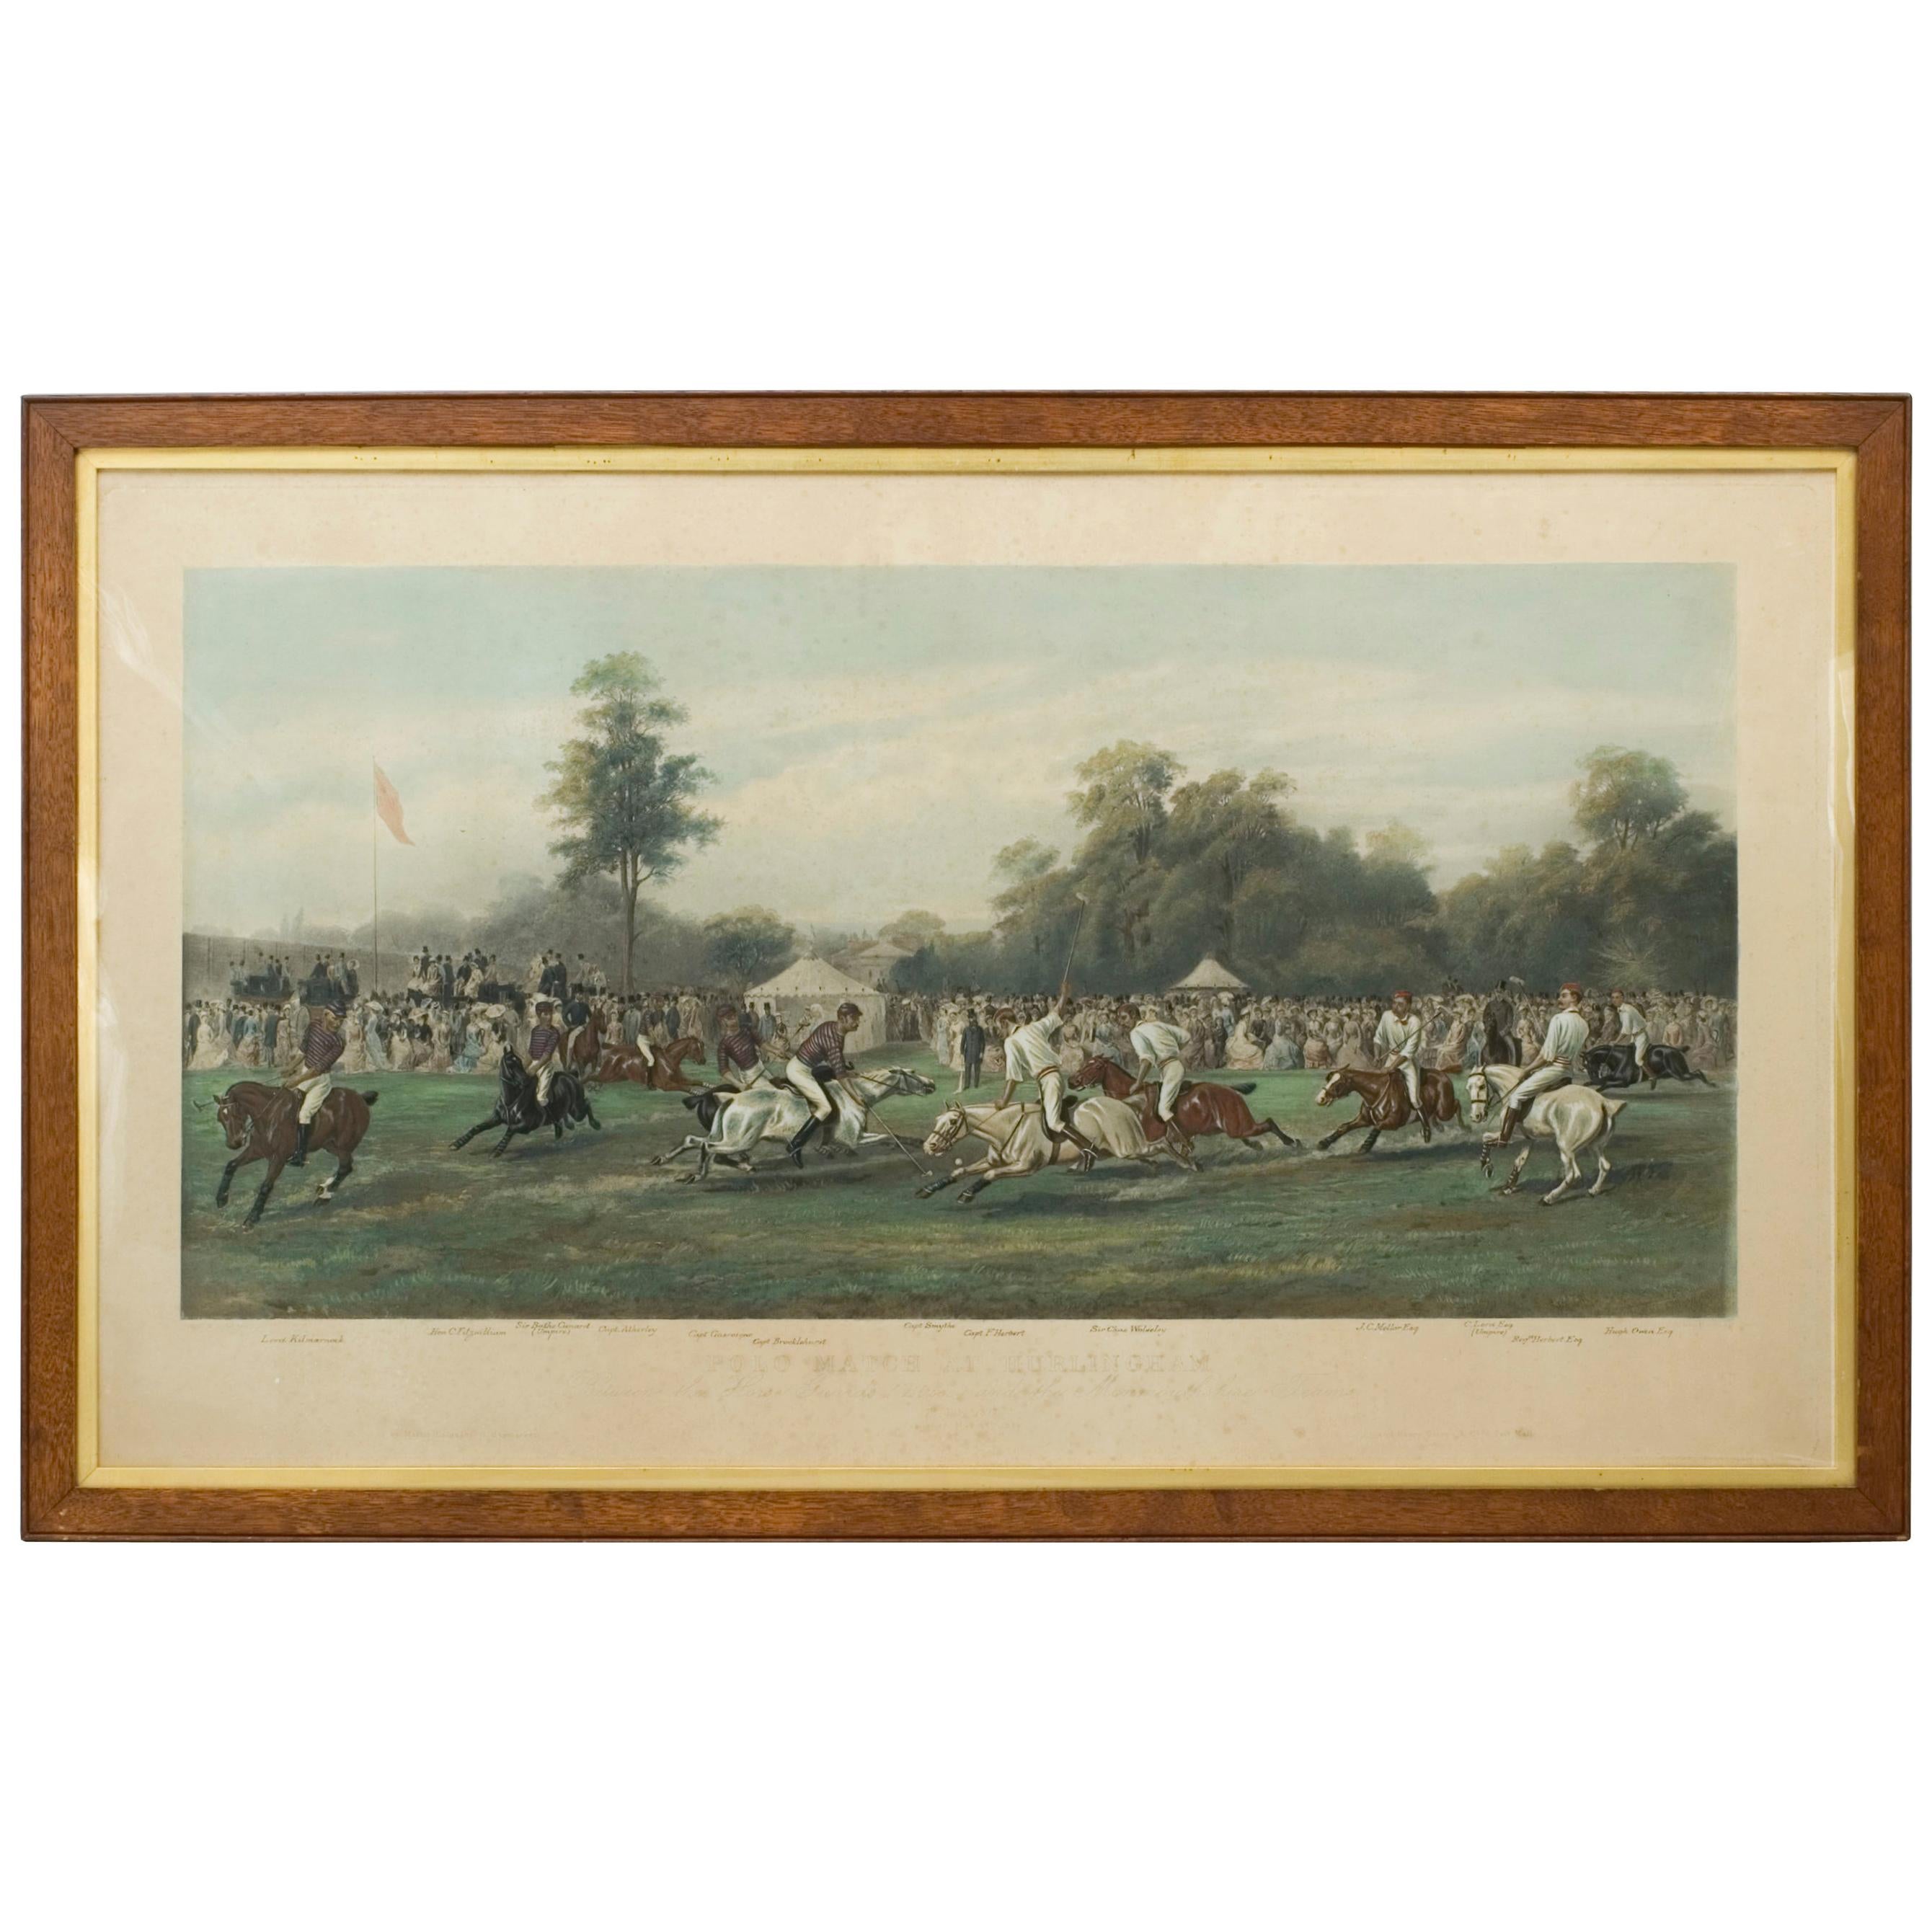 Antique Polo Print, Match at Hurlingham Between the Horse Guards 'Blues'..